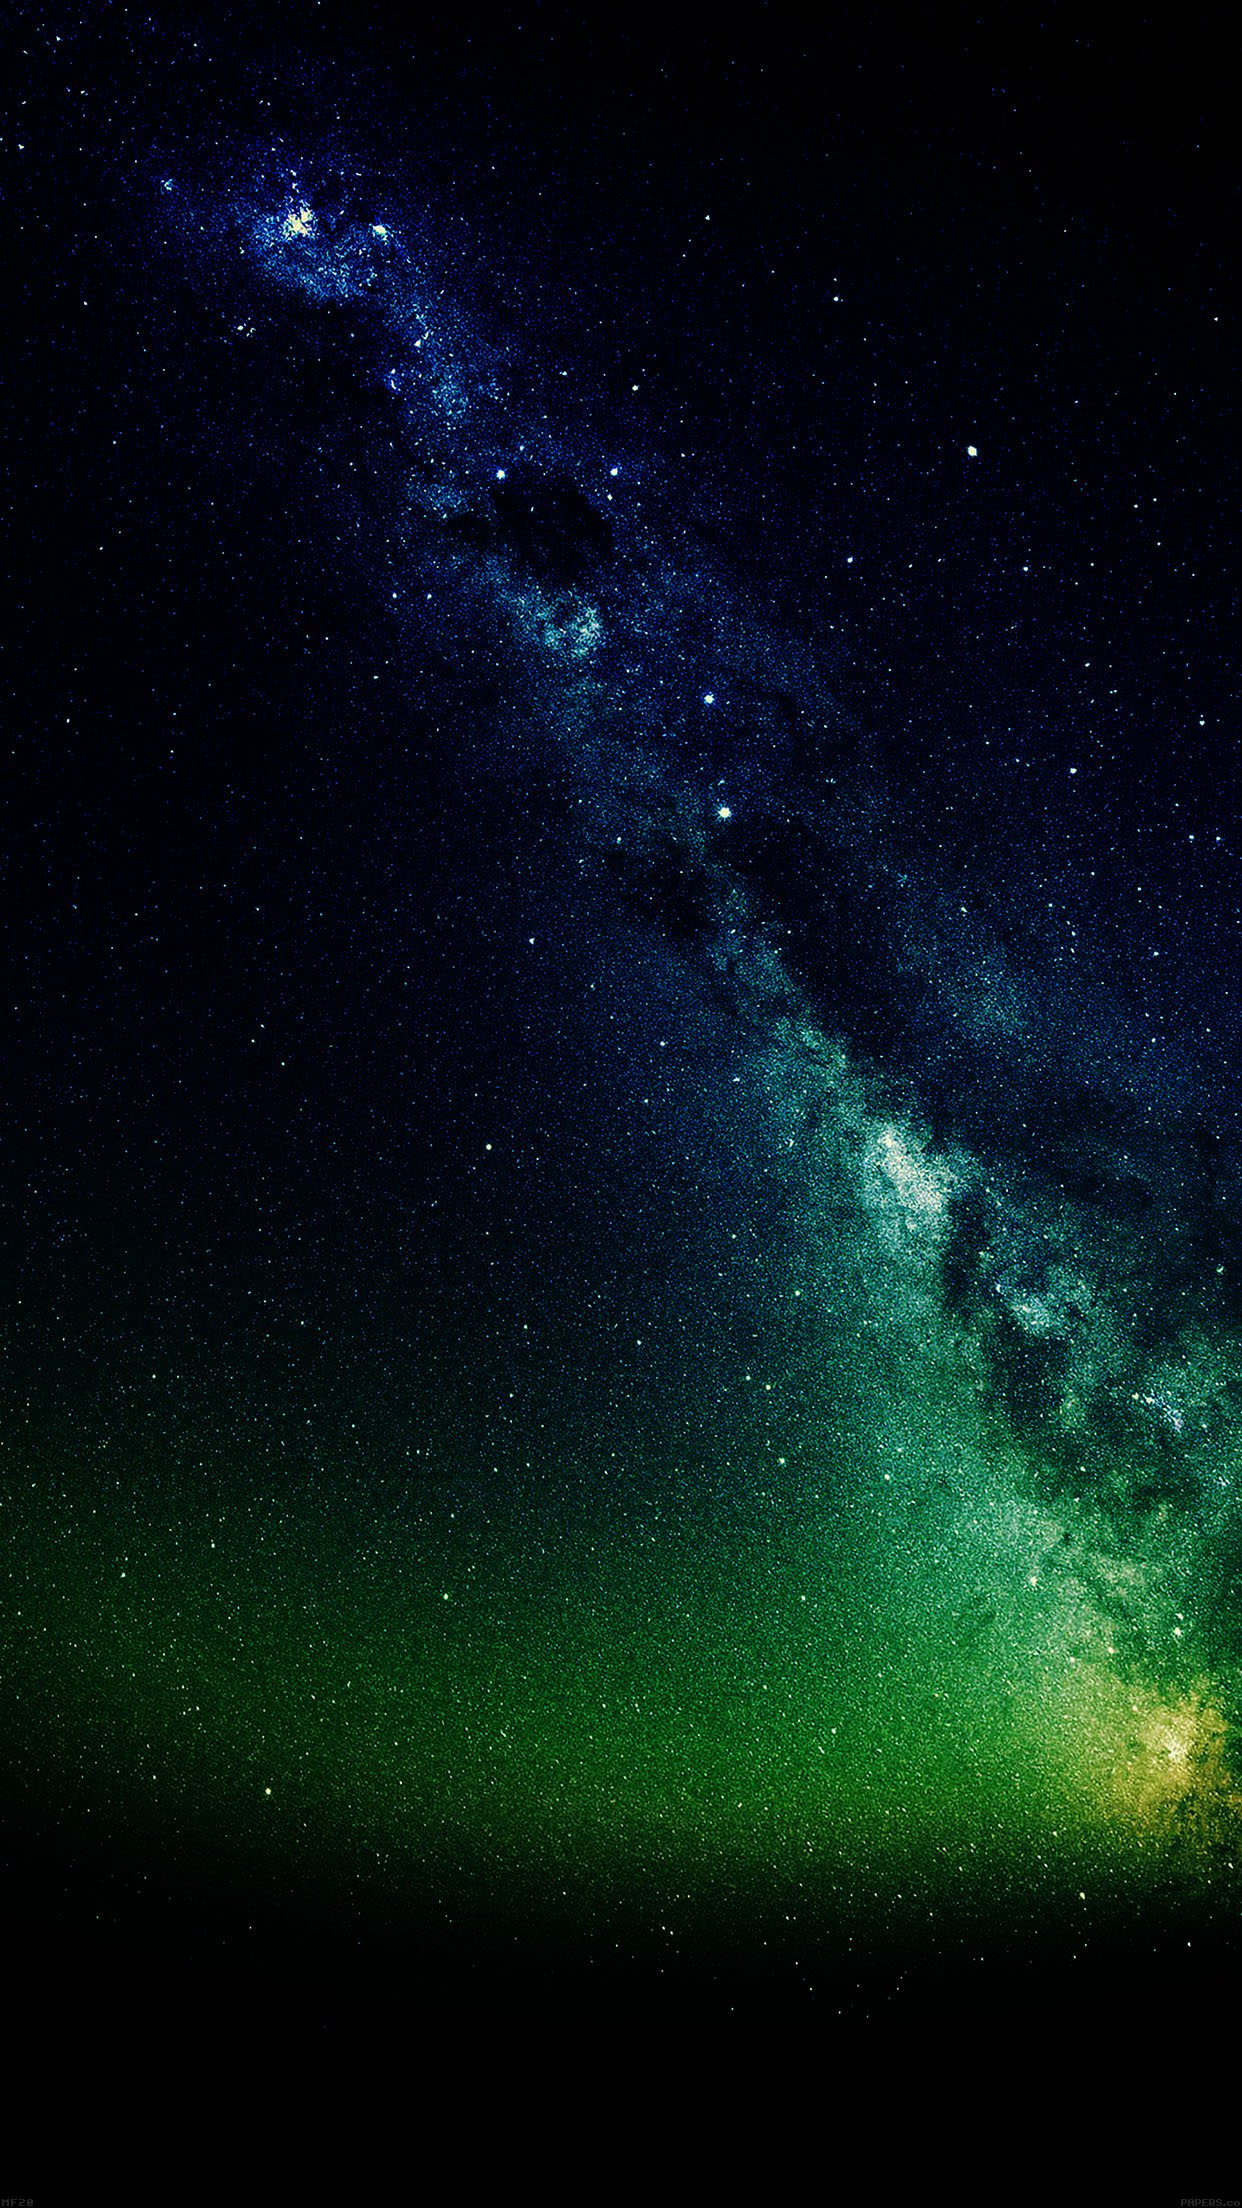 Expansive space wallpapers for iPhone, iPad, and desktop